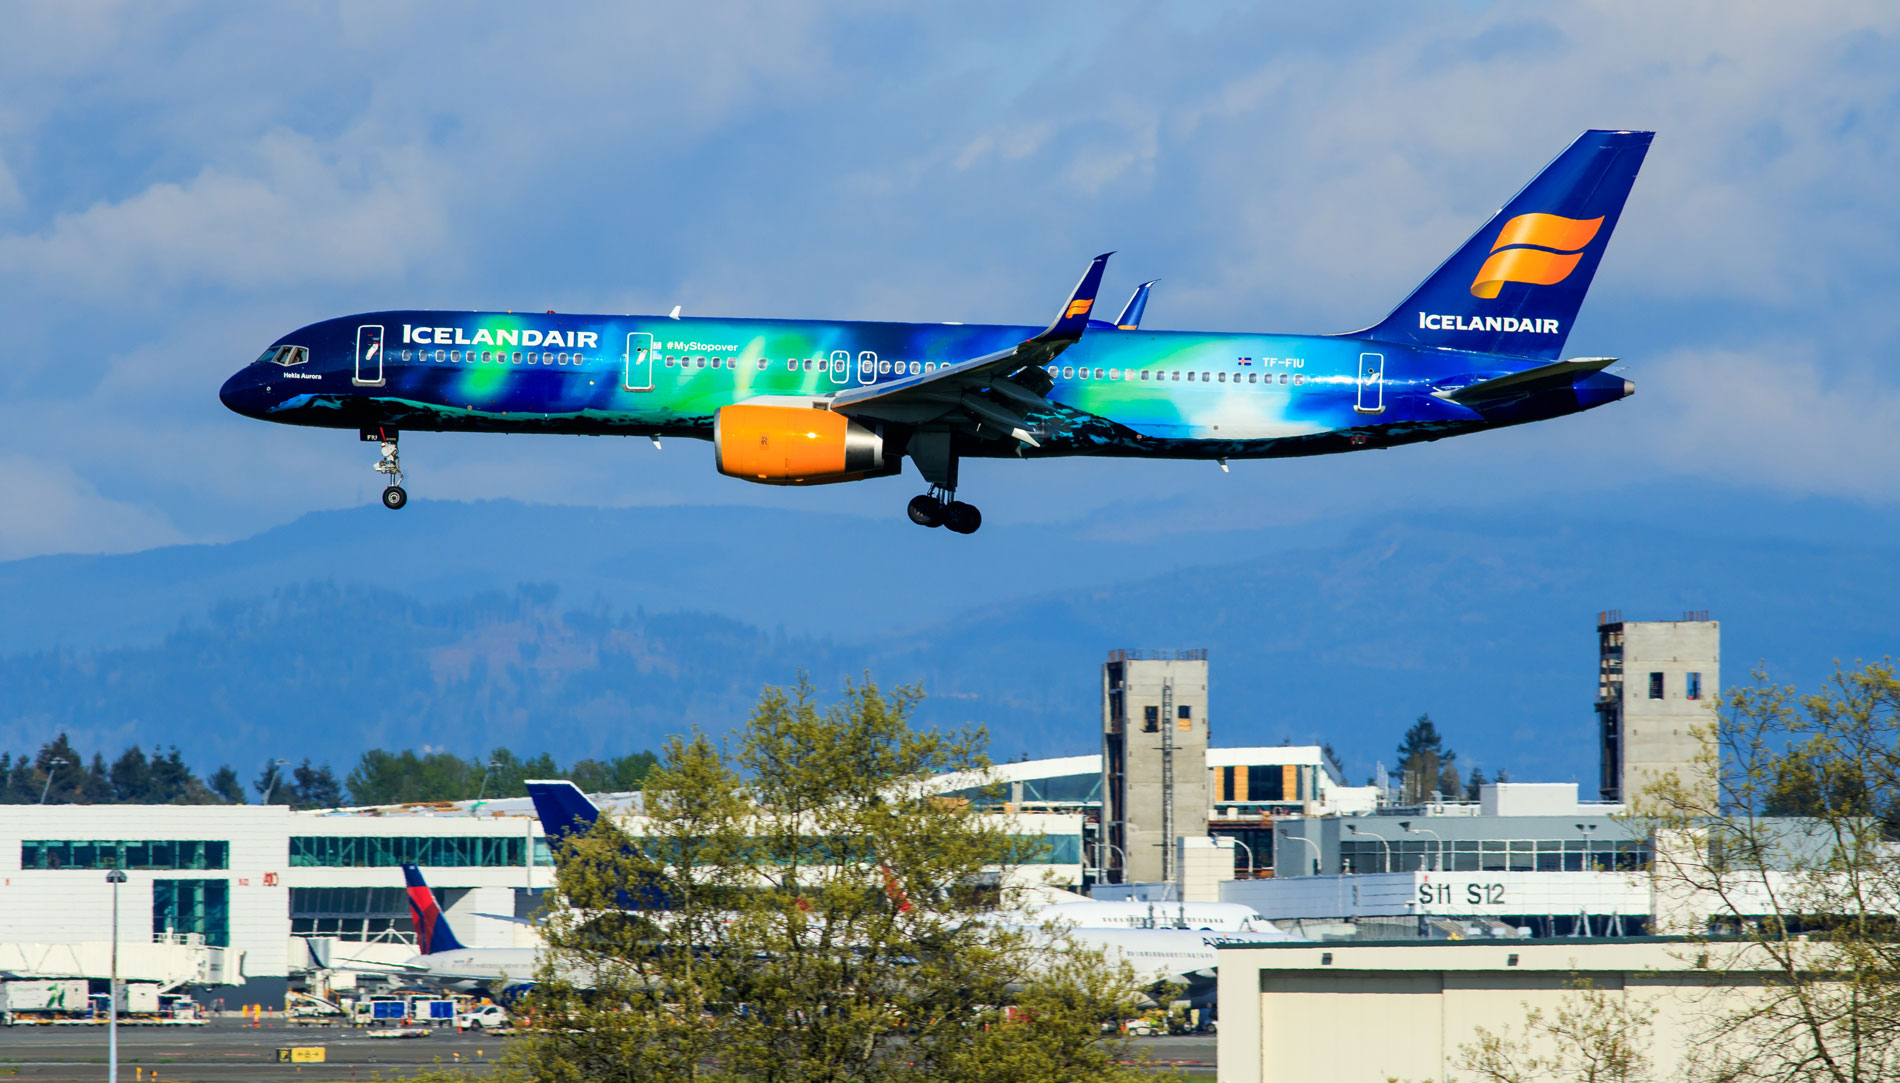 Icelandair’s “Hekla Aurora” Boeing 757, seen here at Seattle-Tacoma International Airport, was made by Boeing in Renton. 